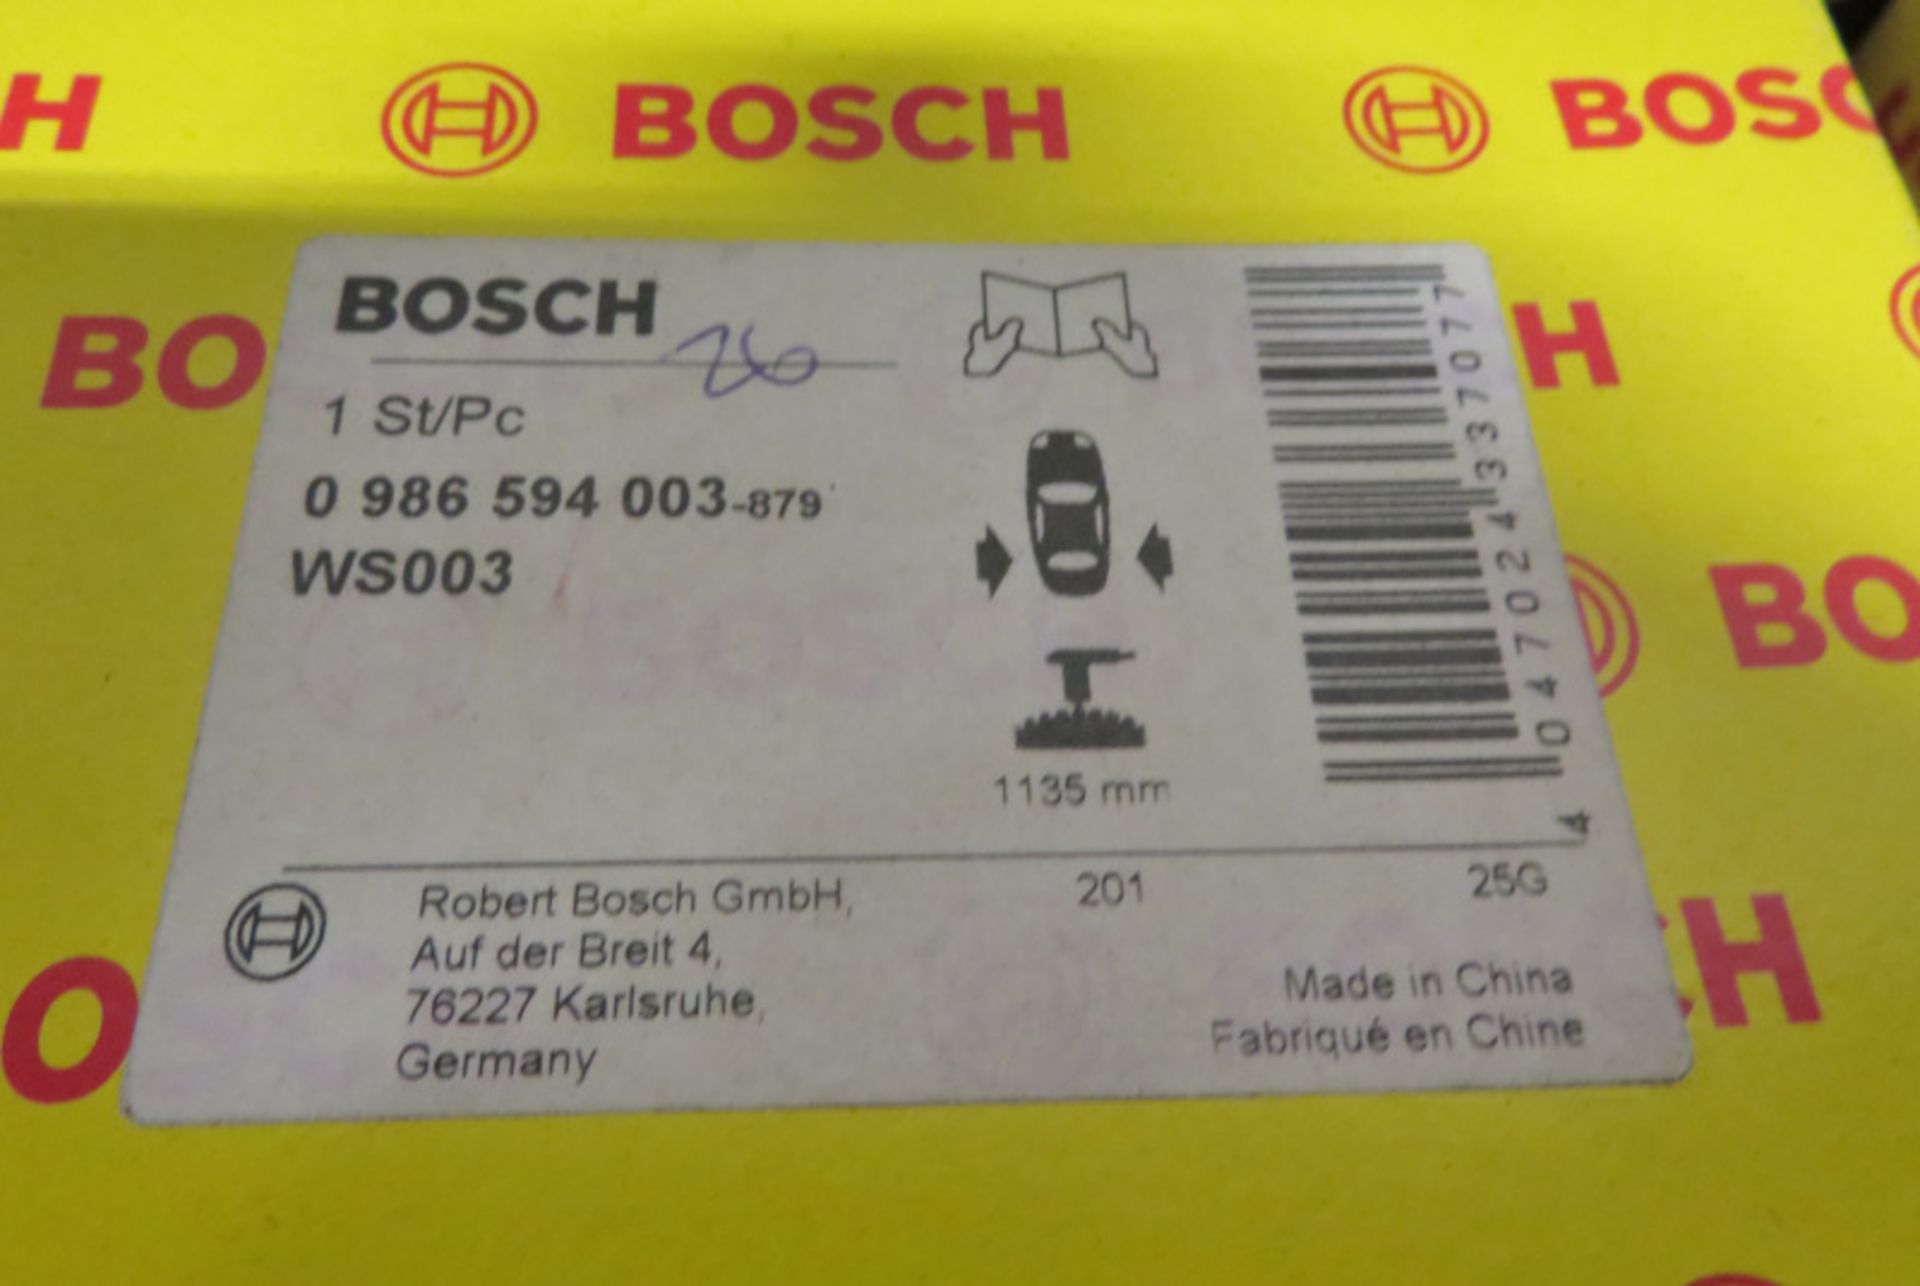 Vehicle parts - Bosch, Delphi - see pictures for models and types - Image 6 of 13